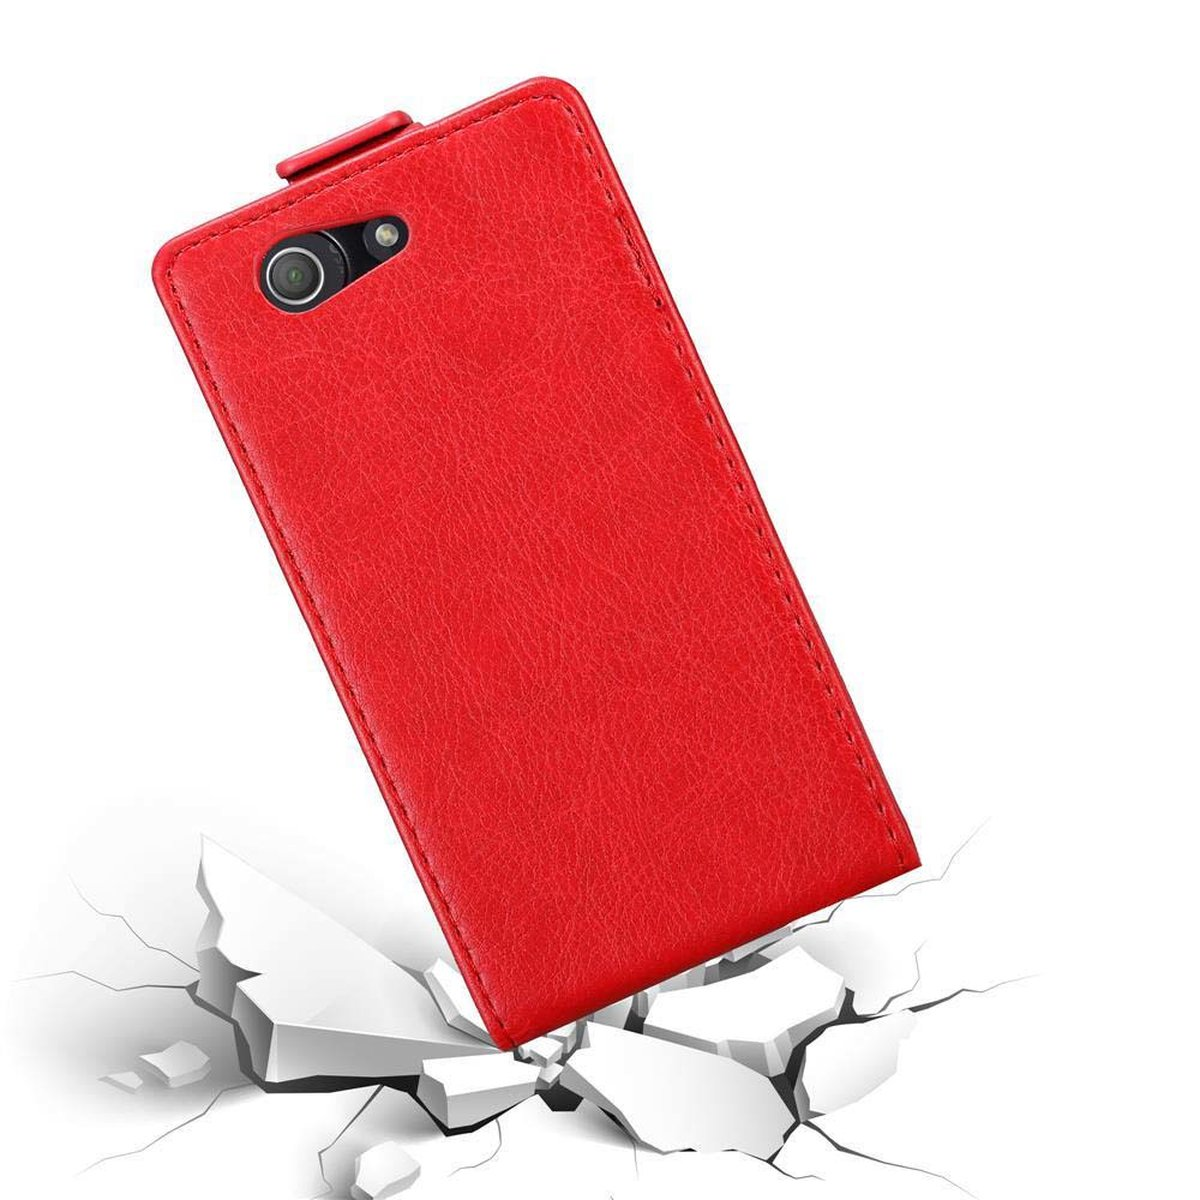 Flip APFEL Xperia ROT Cover, Z3 Style, COMPACT, Sony, im CADORABO Flip Hülle